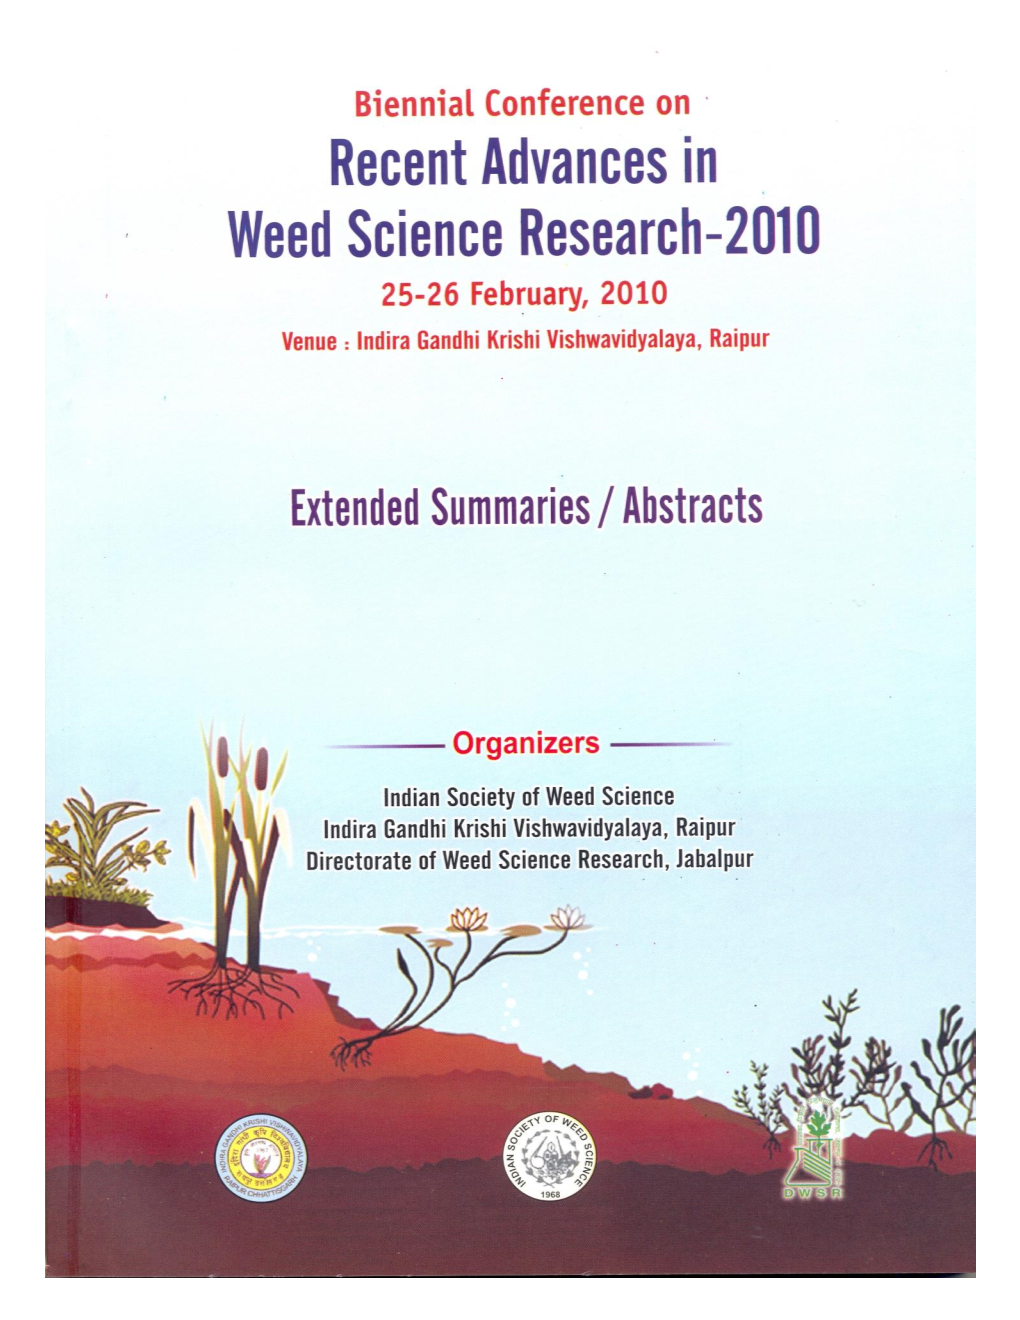 Biennial Conference of Indian Society of Weed Science